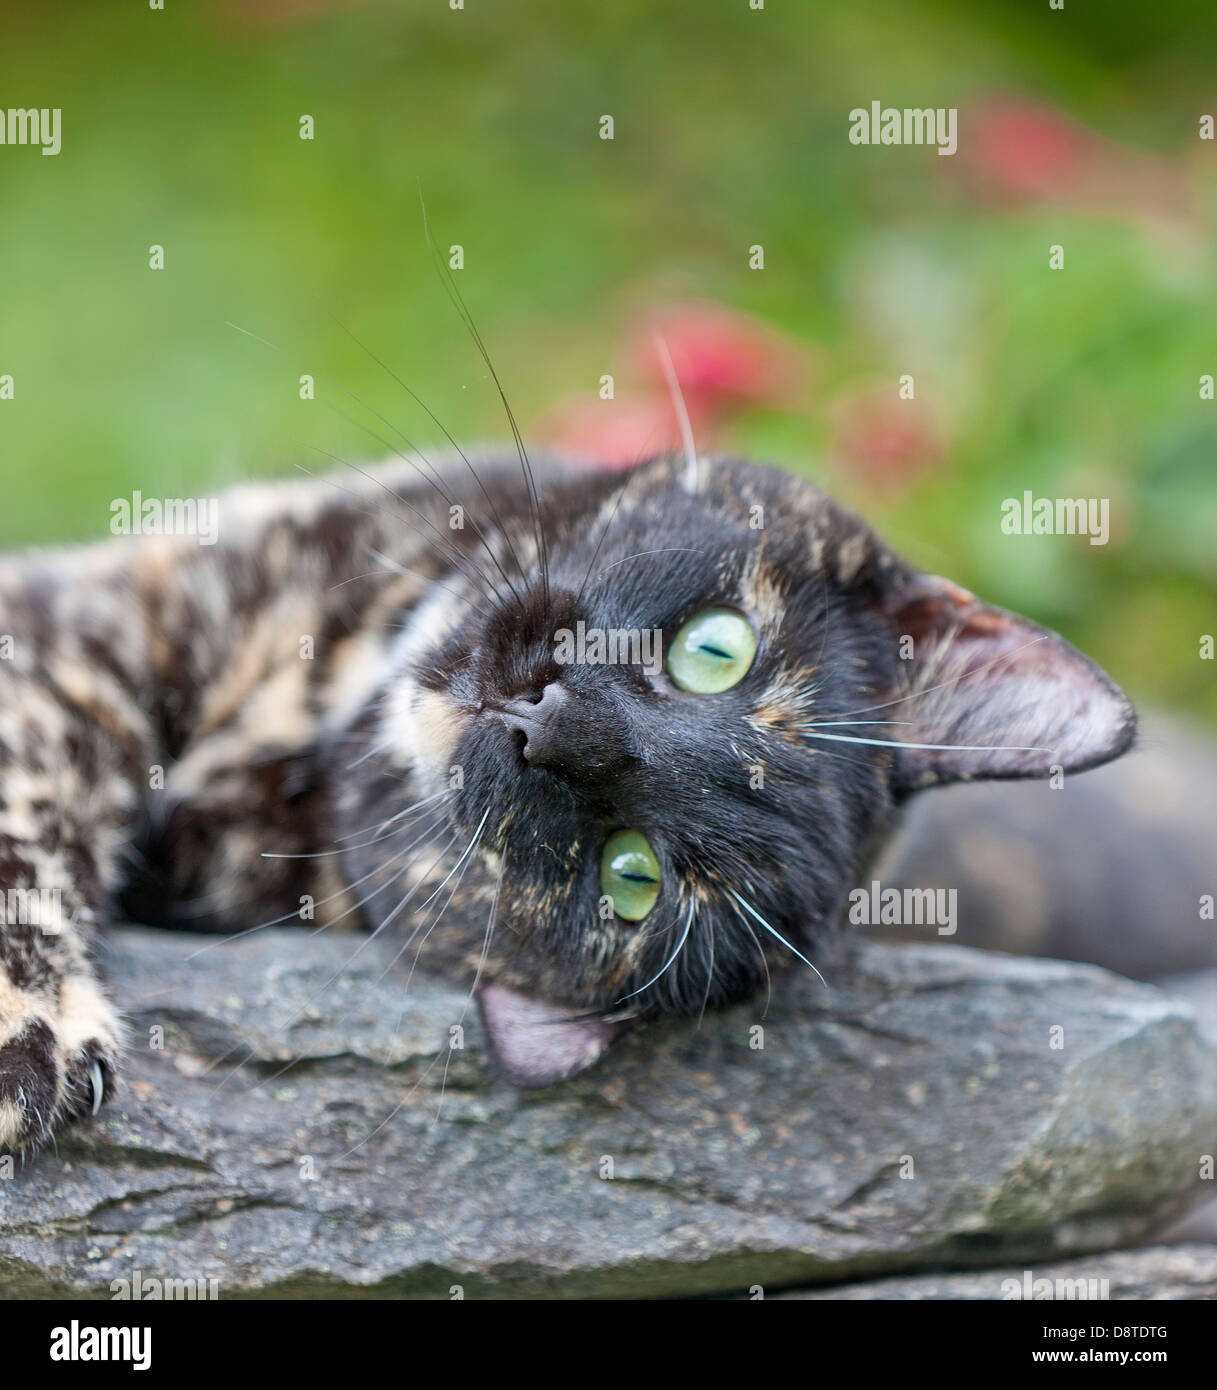 Portrait of cat with green eyes, Norway Stock Photo